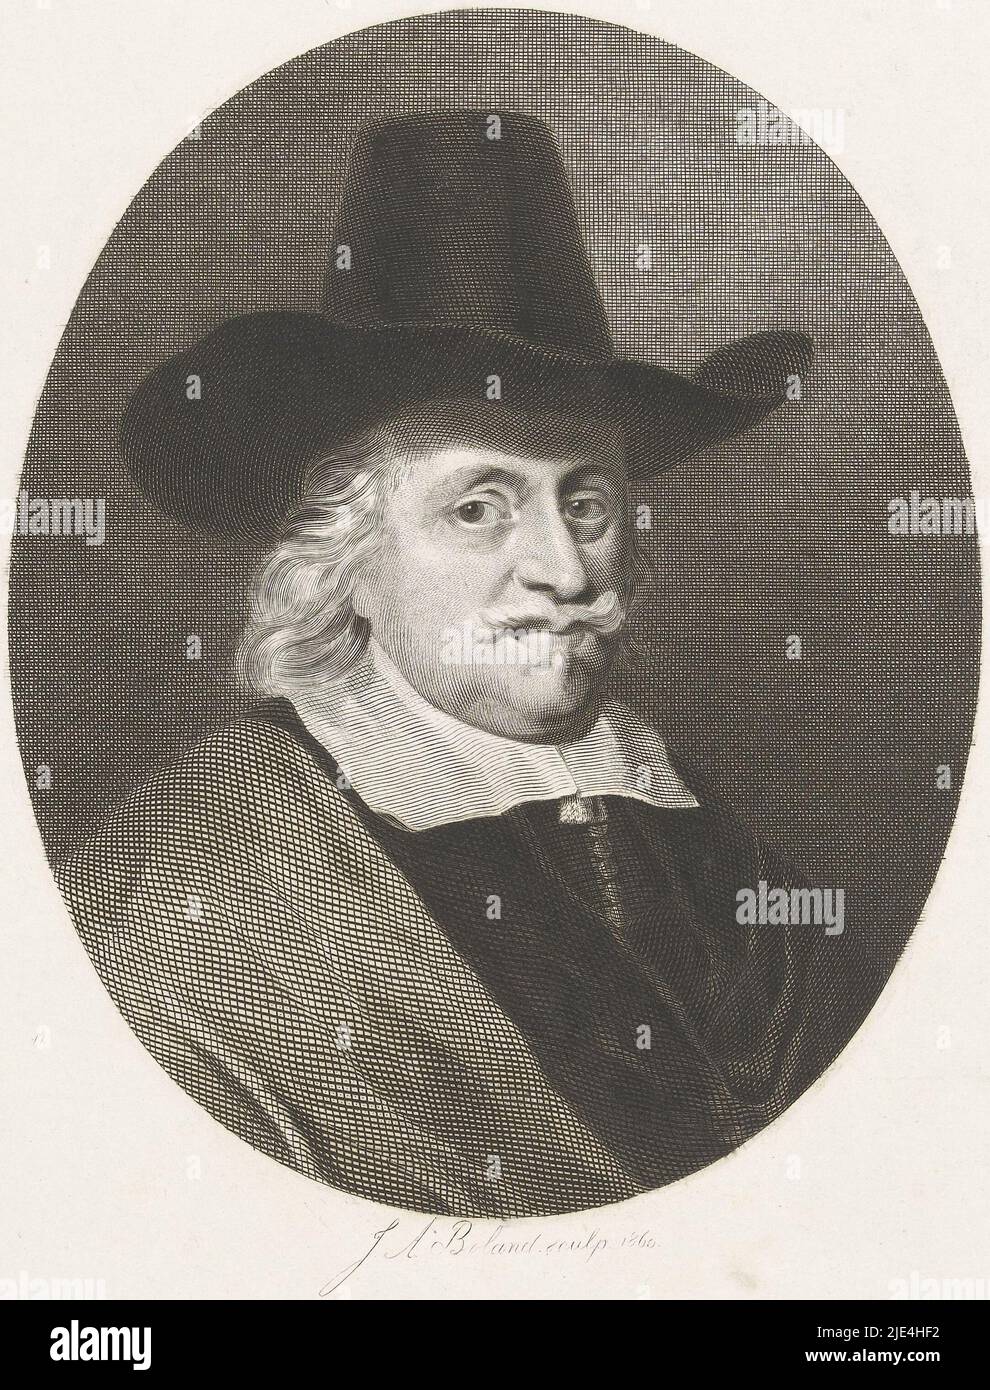 Portrait of a gentleman with hat, Johannes Arnoldus Boland, after anonymous, 1860, print maker: Johannes Arnoldus Boland, (signed by artist), anonymous, Amsterdam, 15-Mar-1860, paper, engraving, h 253 mm × w 198 mm Stock Photo